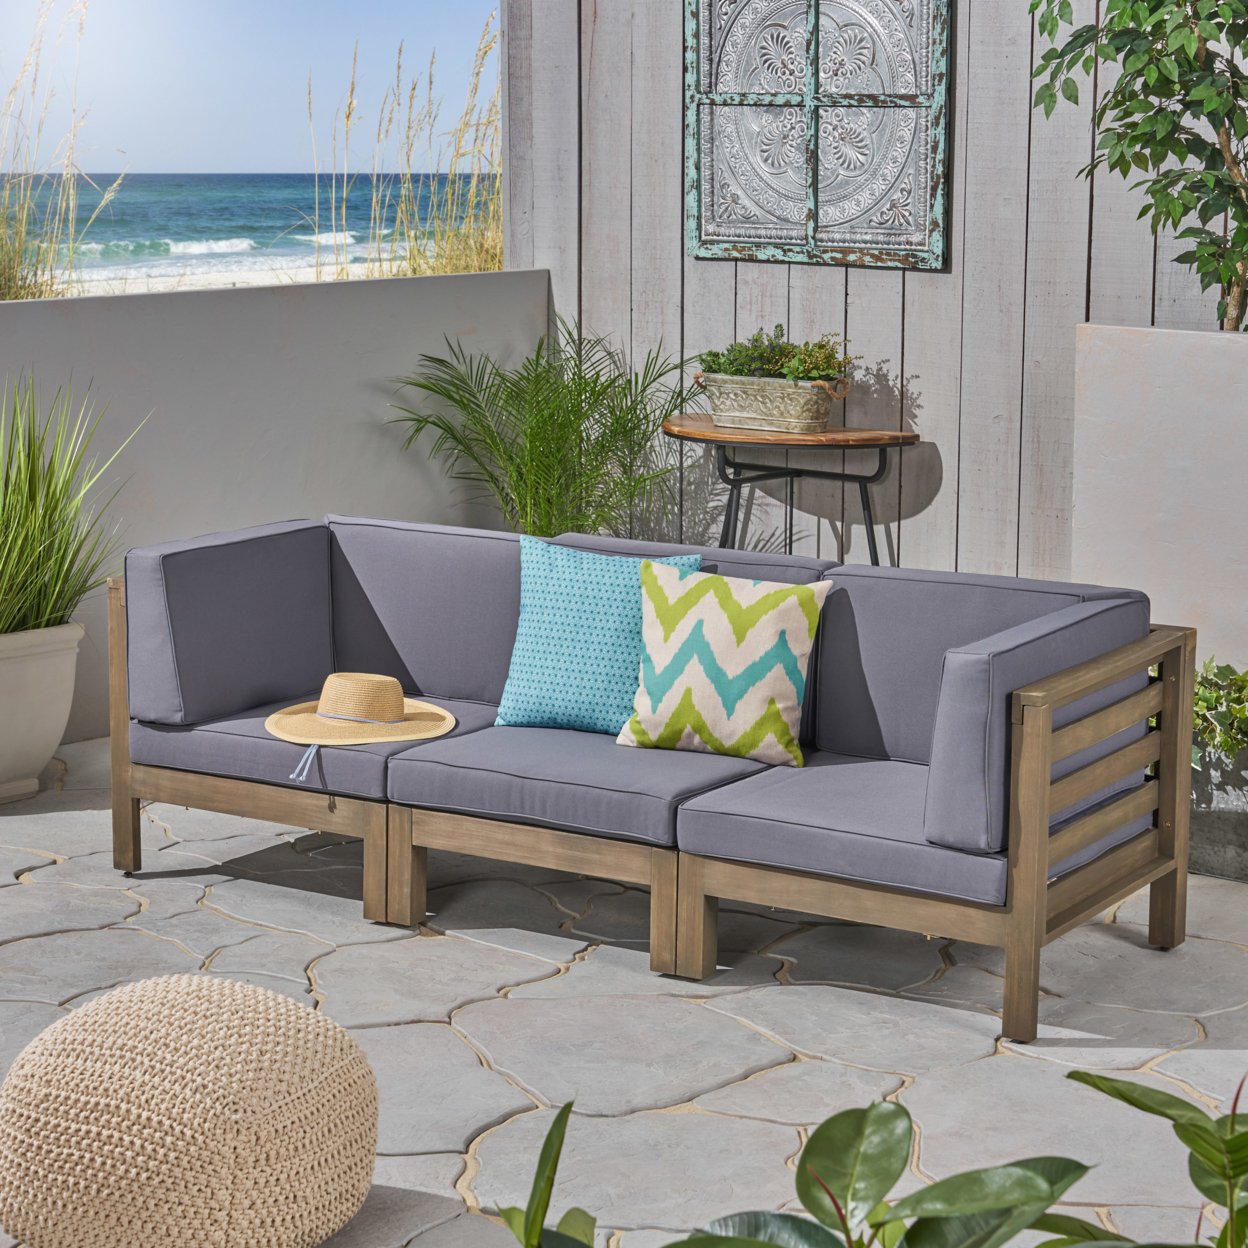 Great Deal Furniture Dawson Outdoor Sectional Sofa Set - 3-Seater - Acacia Wood - Outdoor Cushions - Dark Gray